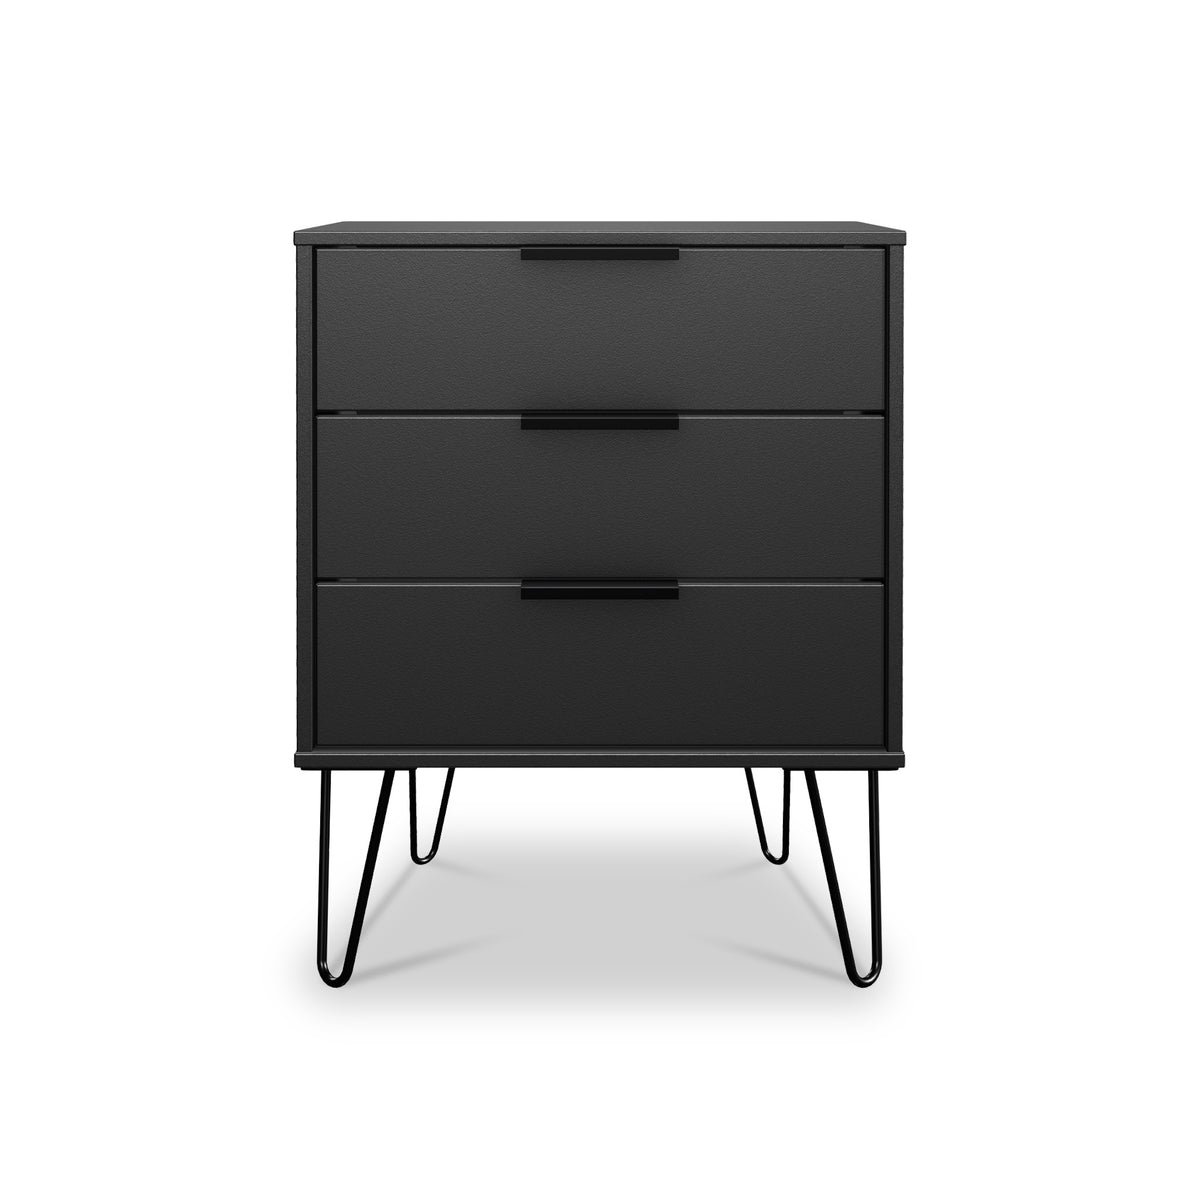 Moreno Graphite Grey 3 Drawer Midi Chest of Drawers Unit with hairpin legs from Roseland Furniture